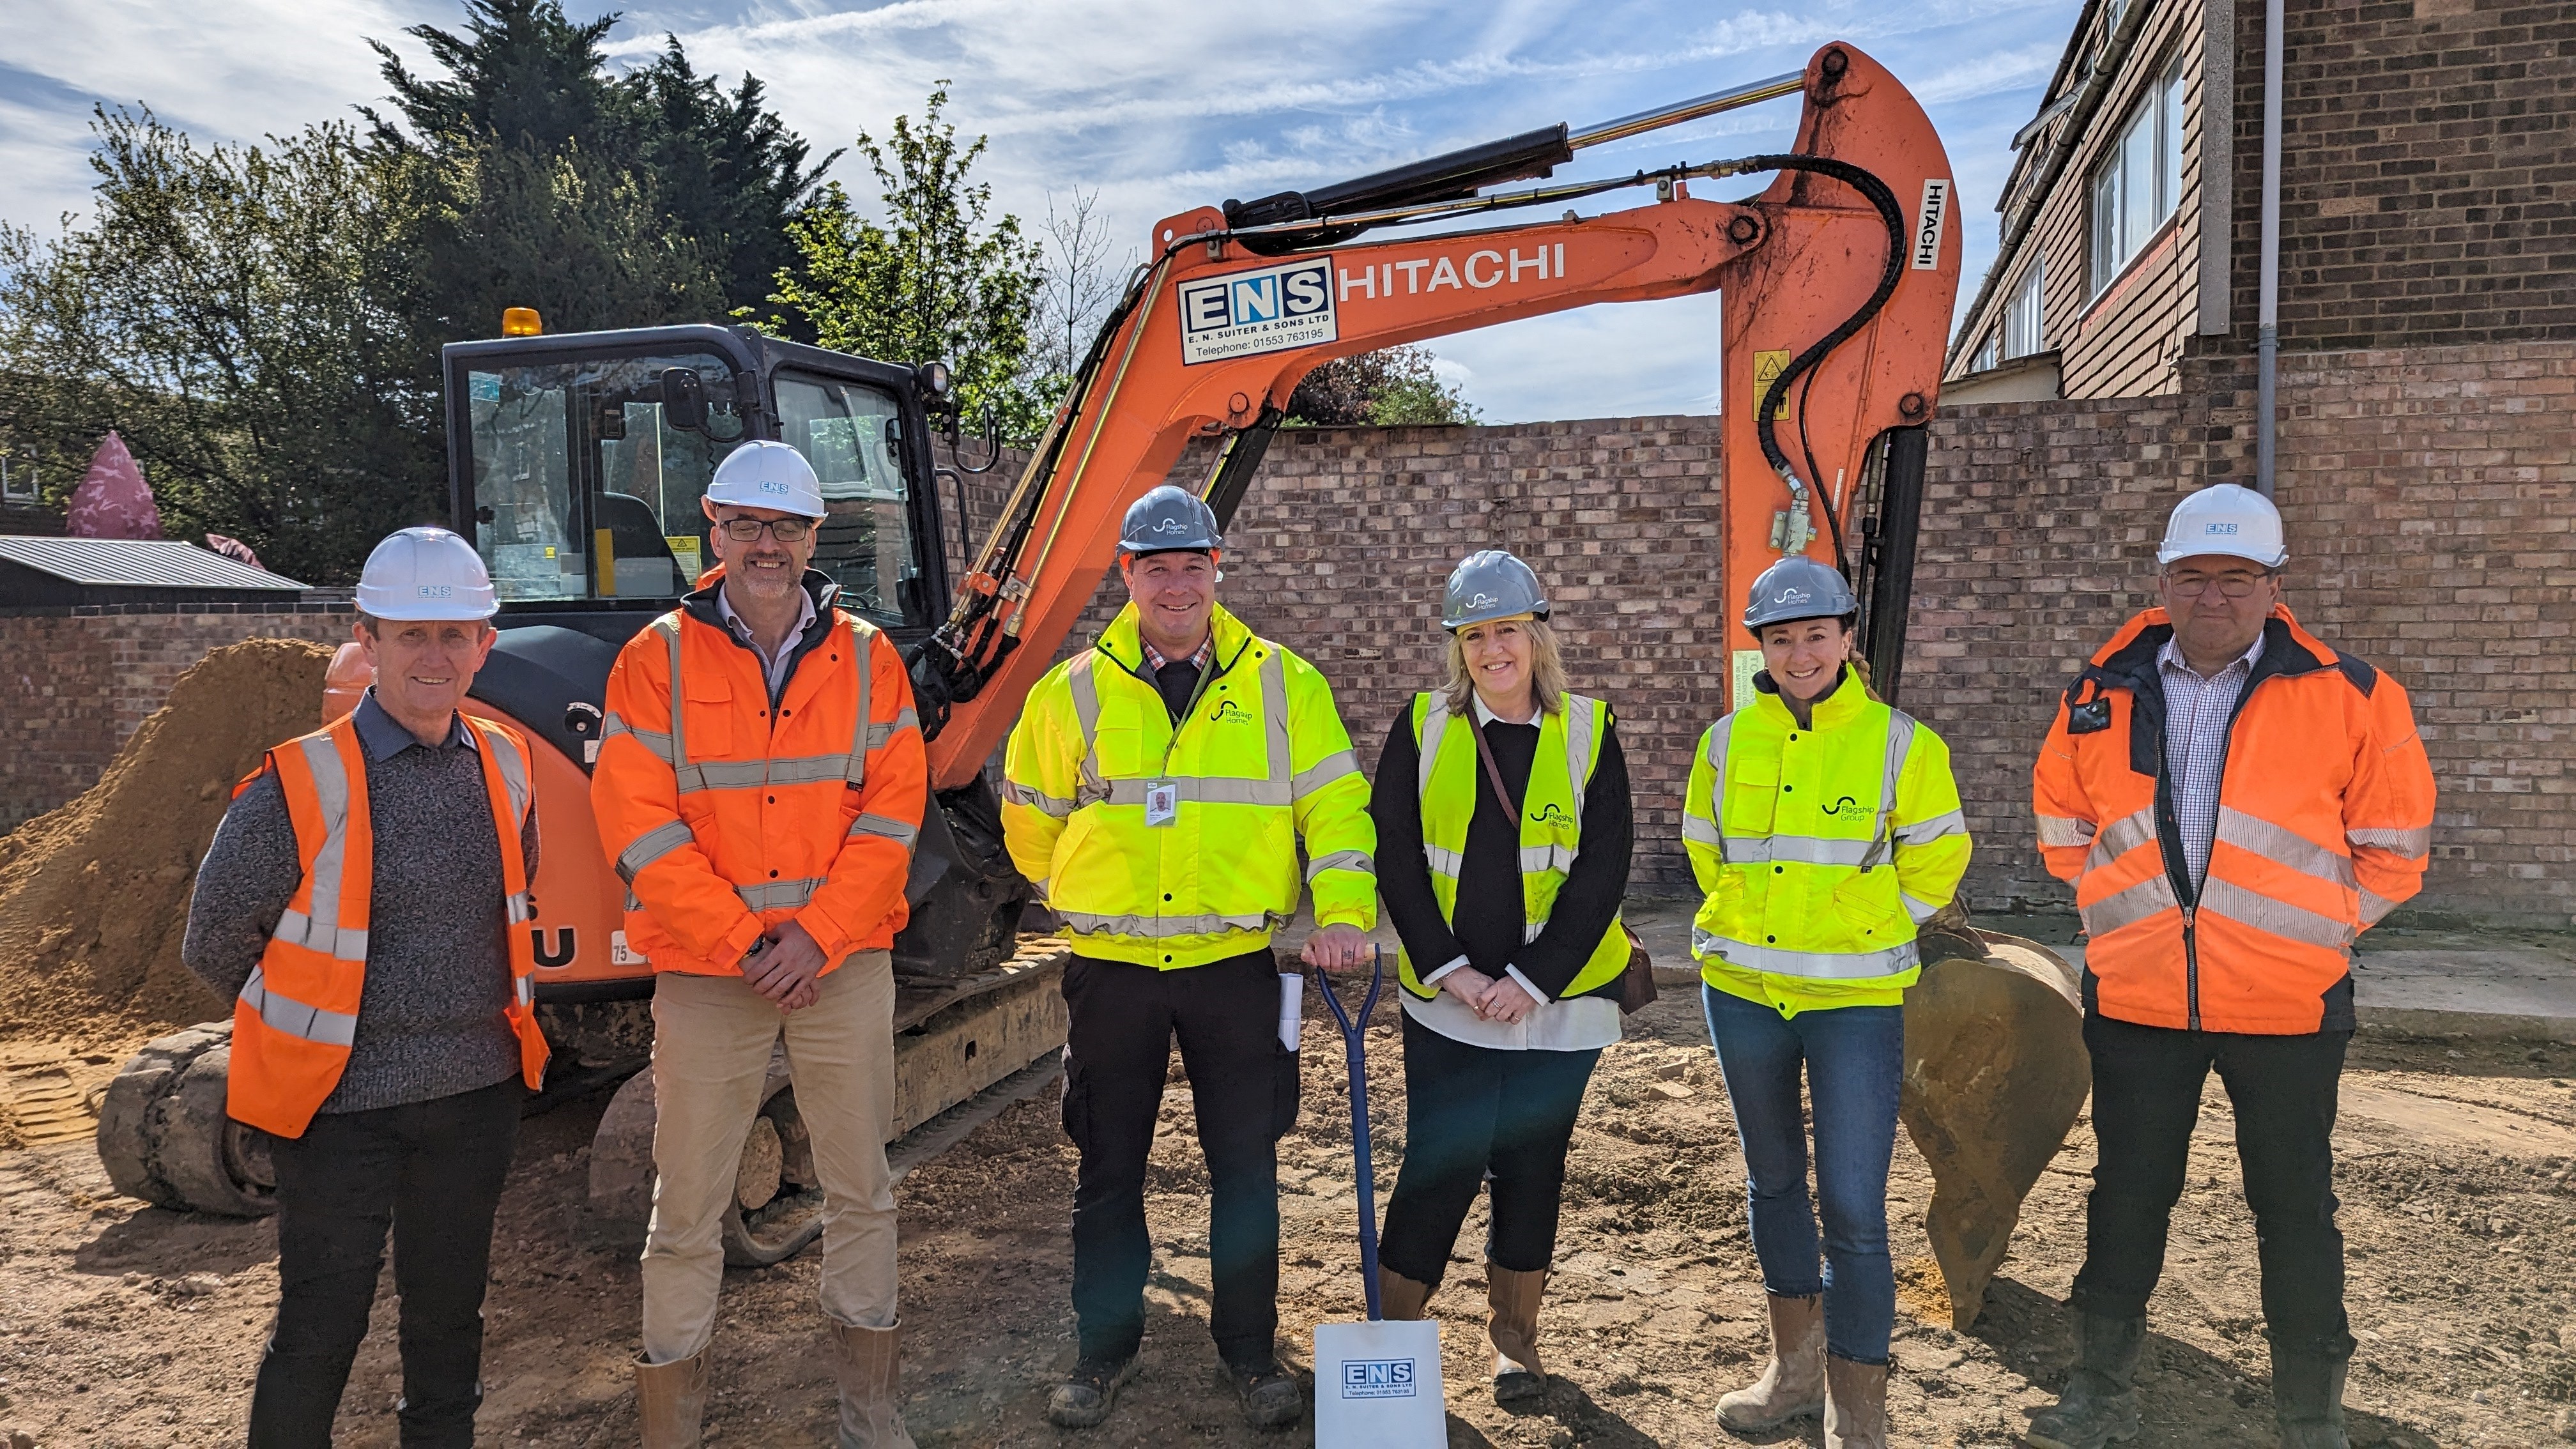 L-R: Martin Kearns, Steven Gould (EN Suiter), Simon Floor, Lisa Davis. Anna Cook-Bacon (Flagship Homes),  and Ian Reeve (En Suiter) on one of the garage sites to be turned into new affordable homes in Mildenhall. All 6 are standing in hi-vis jackets in front of a small digger